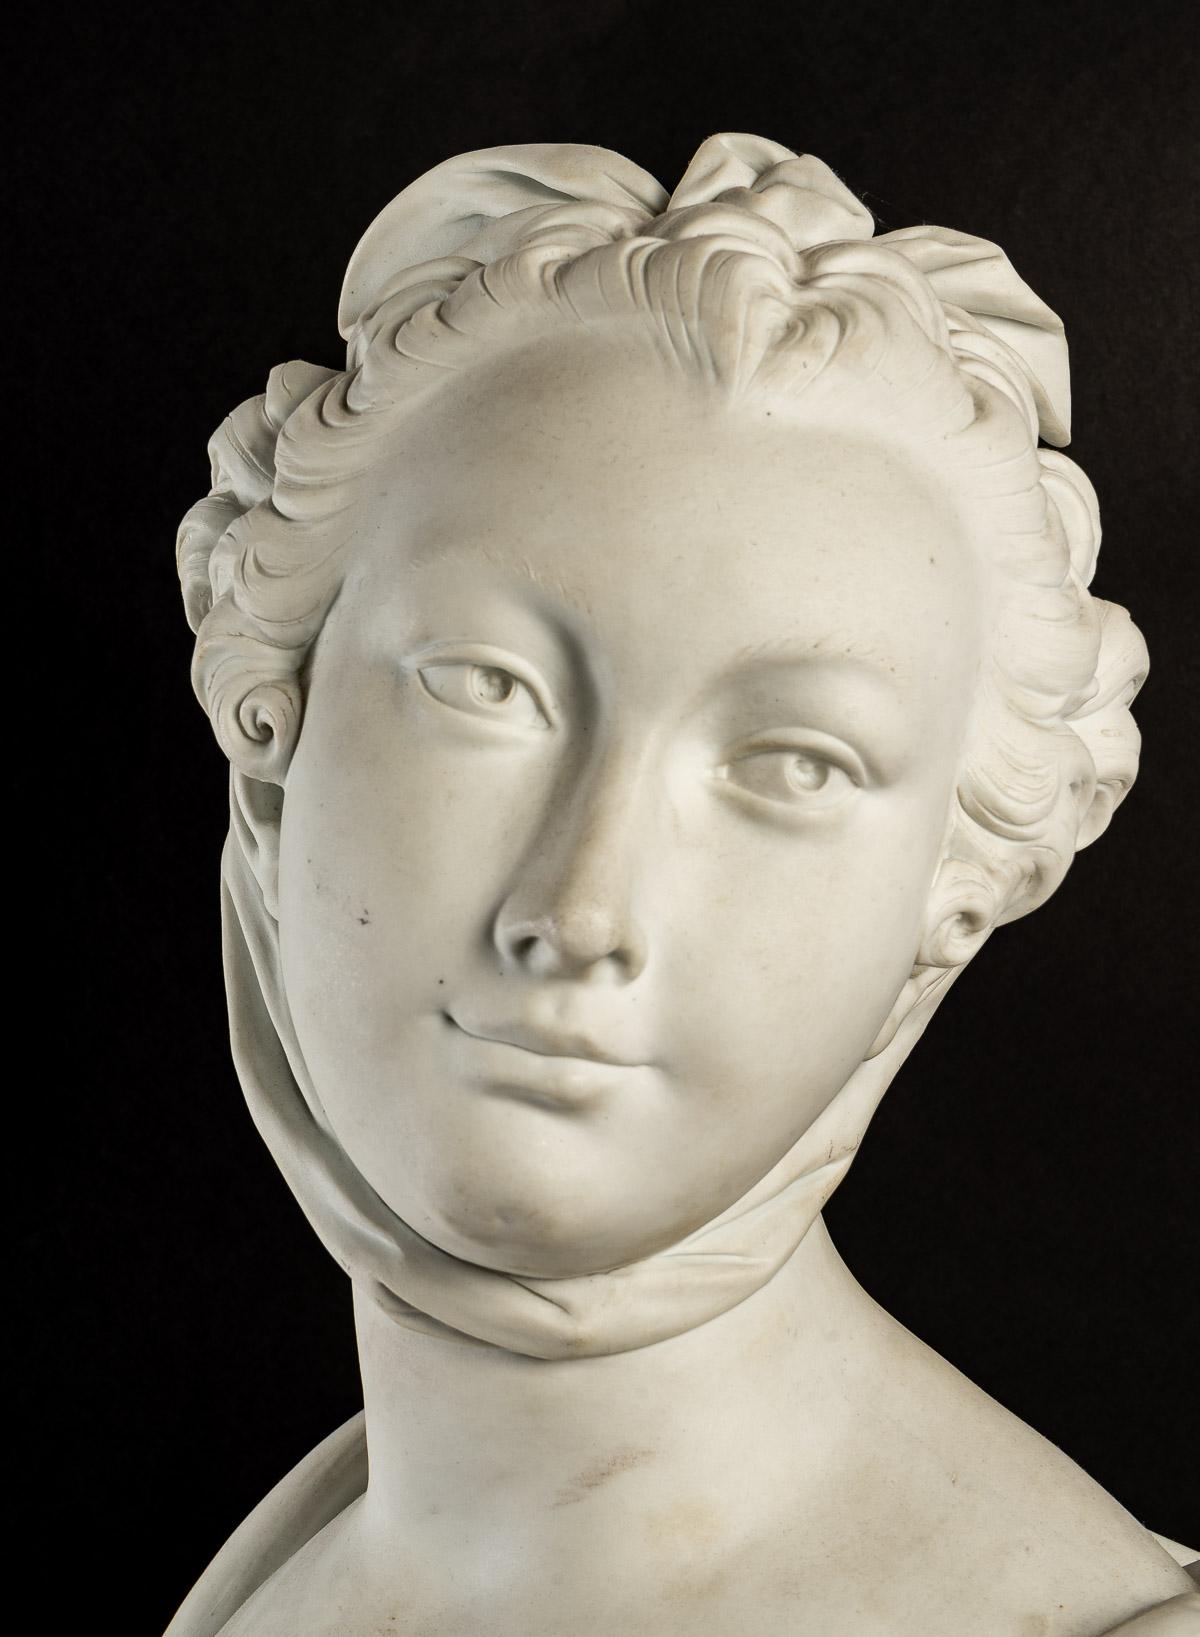 Sculpture, Bust of Pompadour, in Sèvres biscuit from the 19th century
H: 70 cm, W: 39 cm, D: 30 cm.